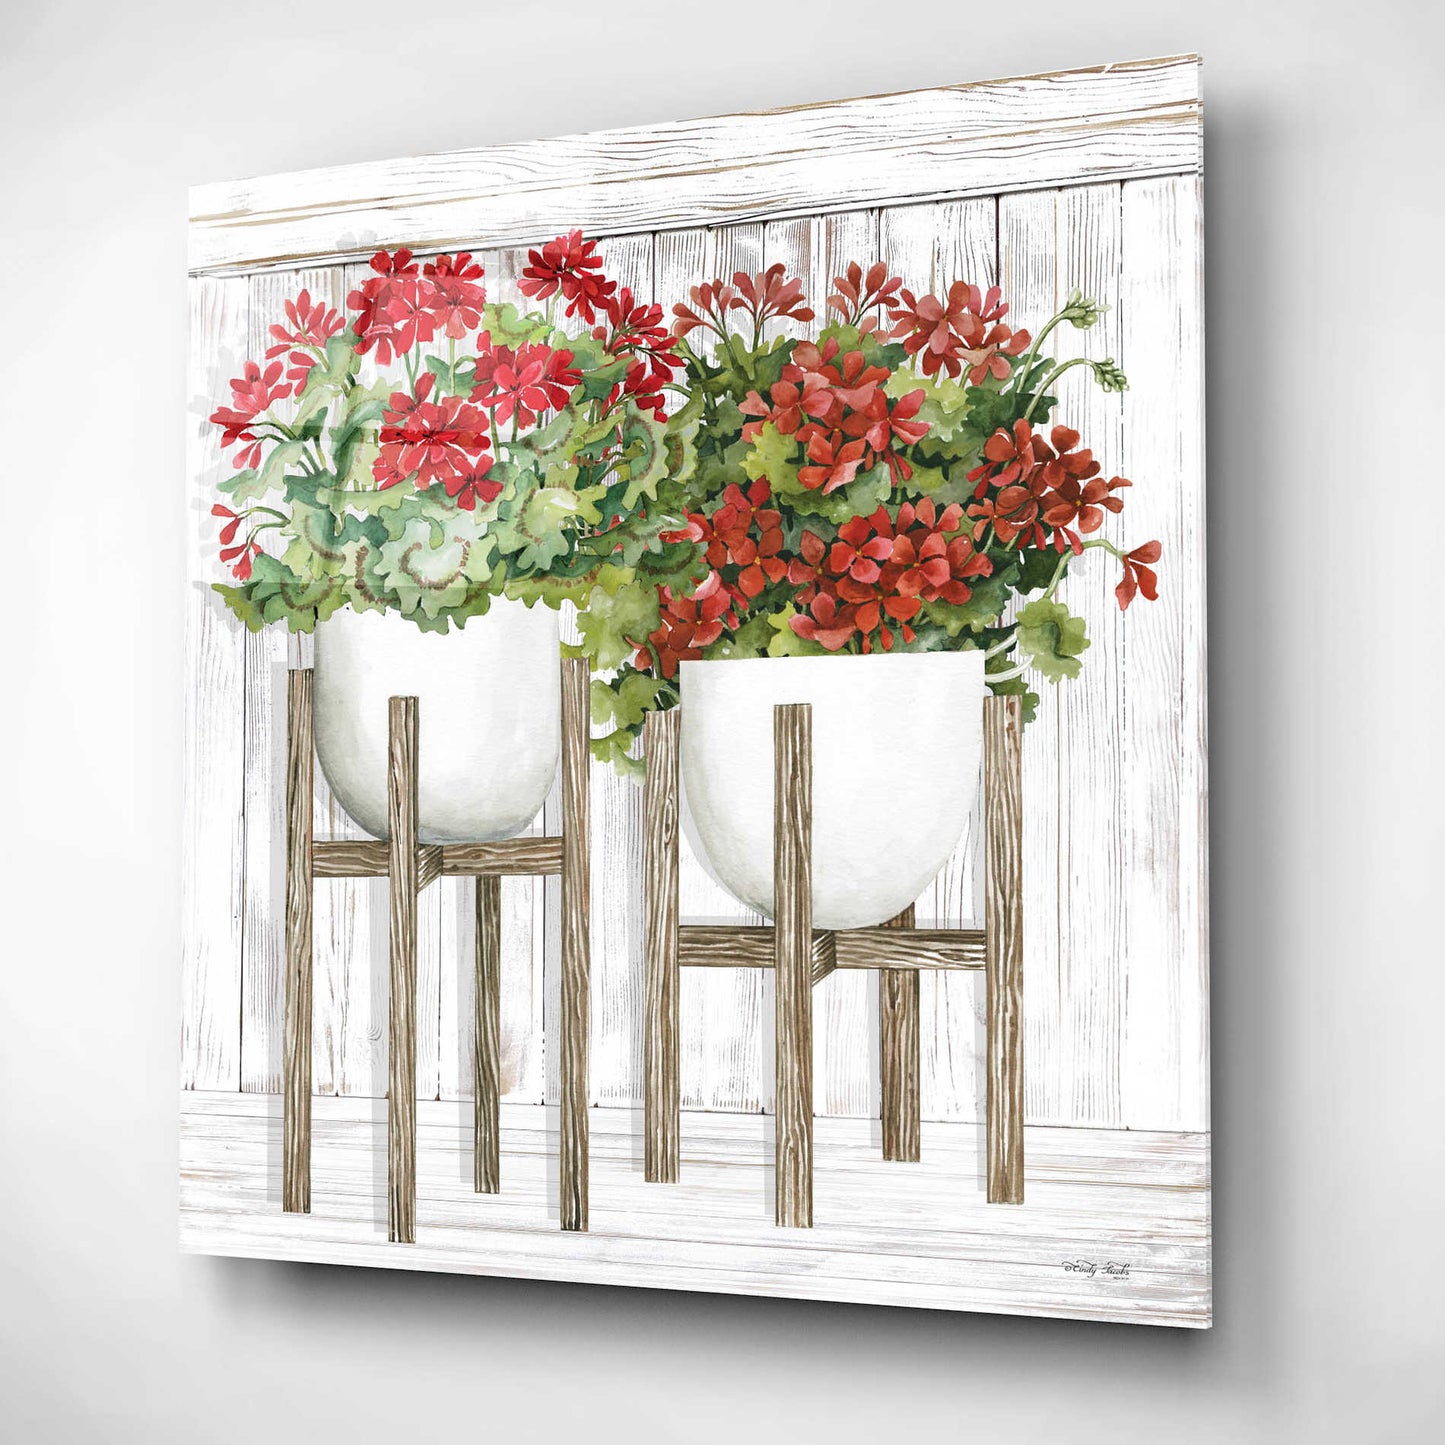 Epic Art 'Red Geraniums' by Cindy Jacobs, Acrylic Glass Wall Art,12x12